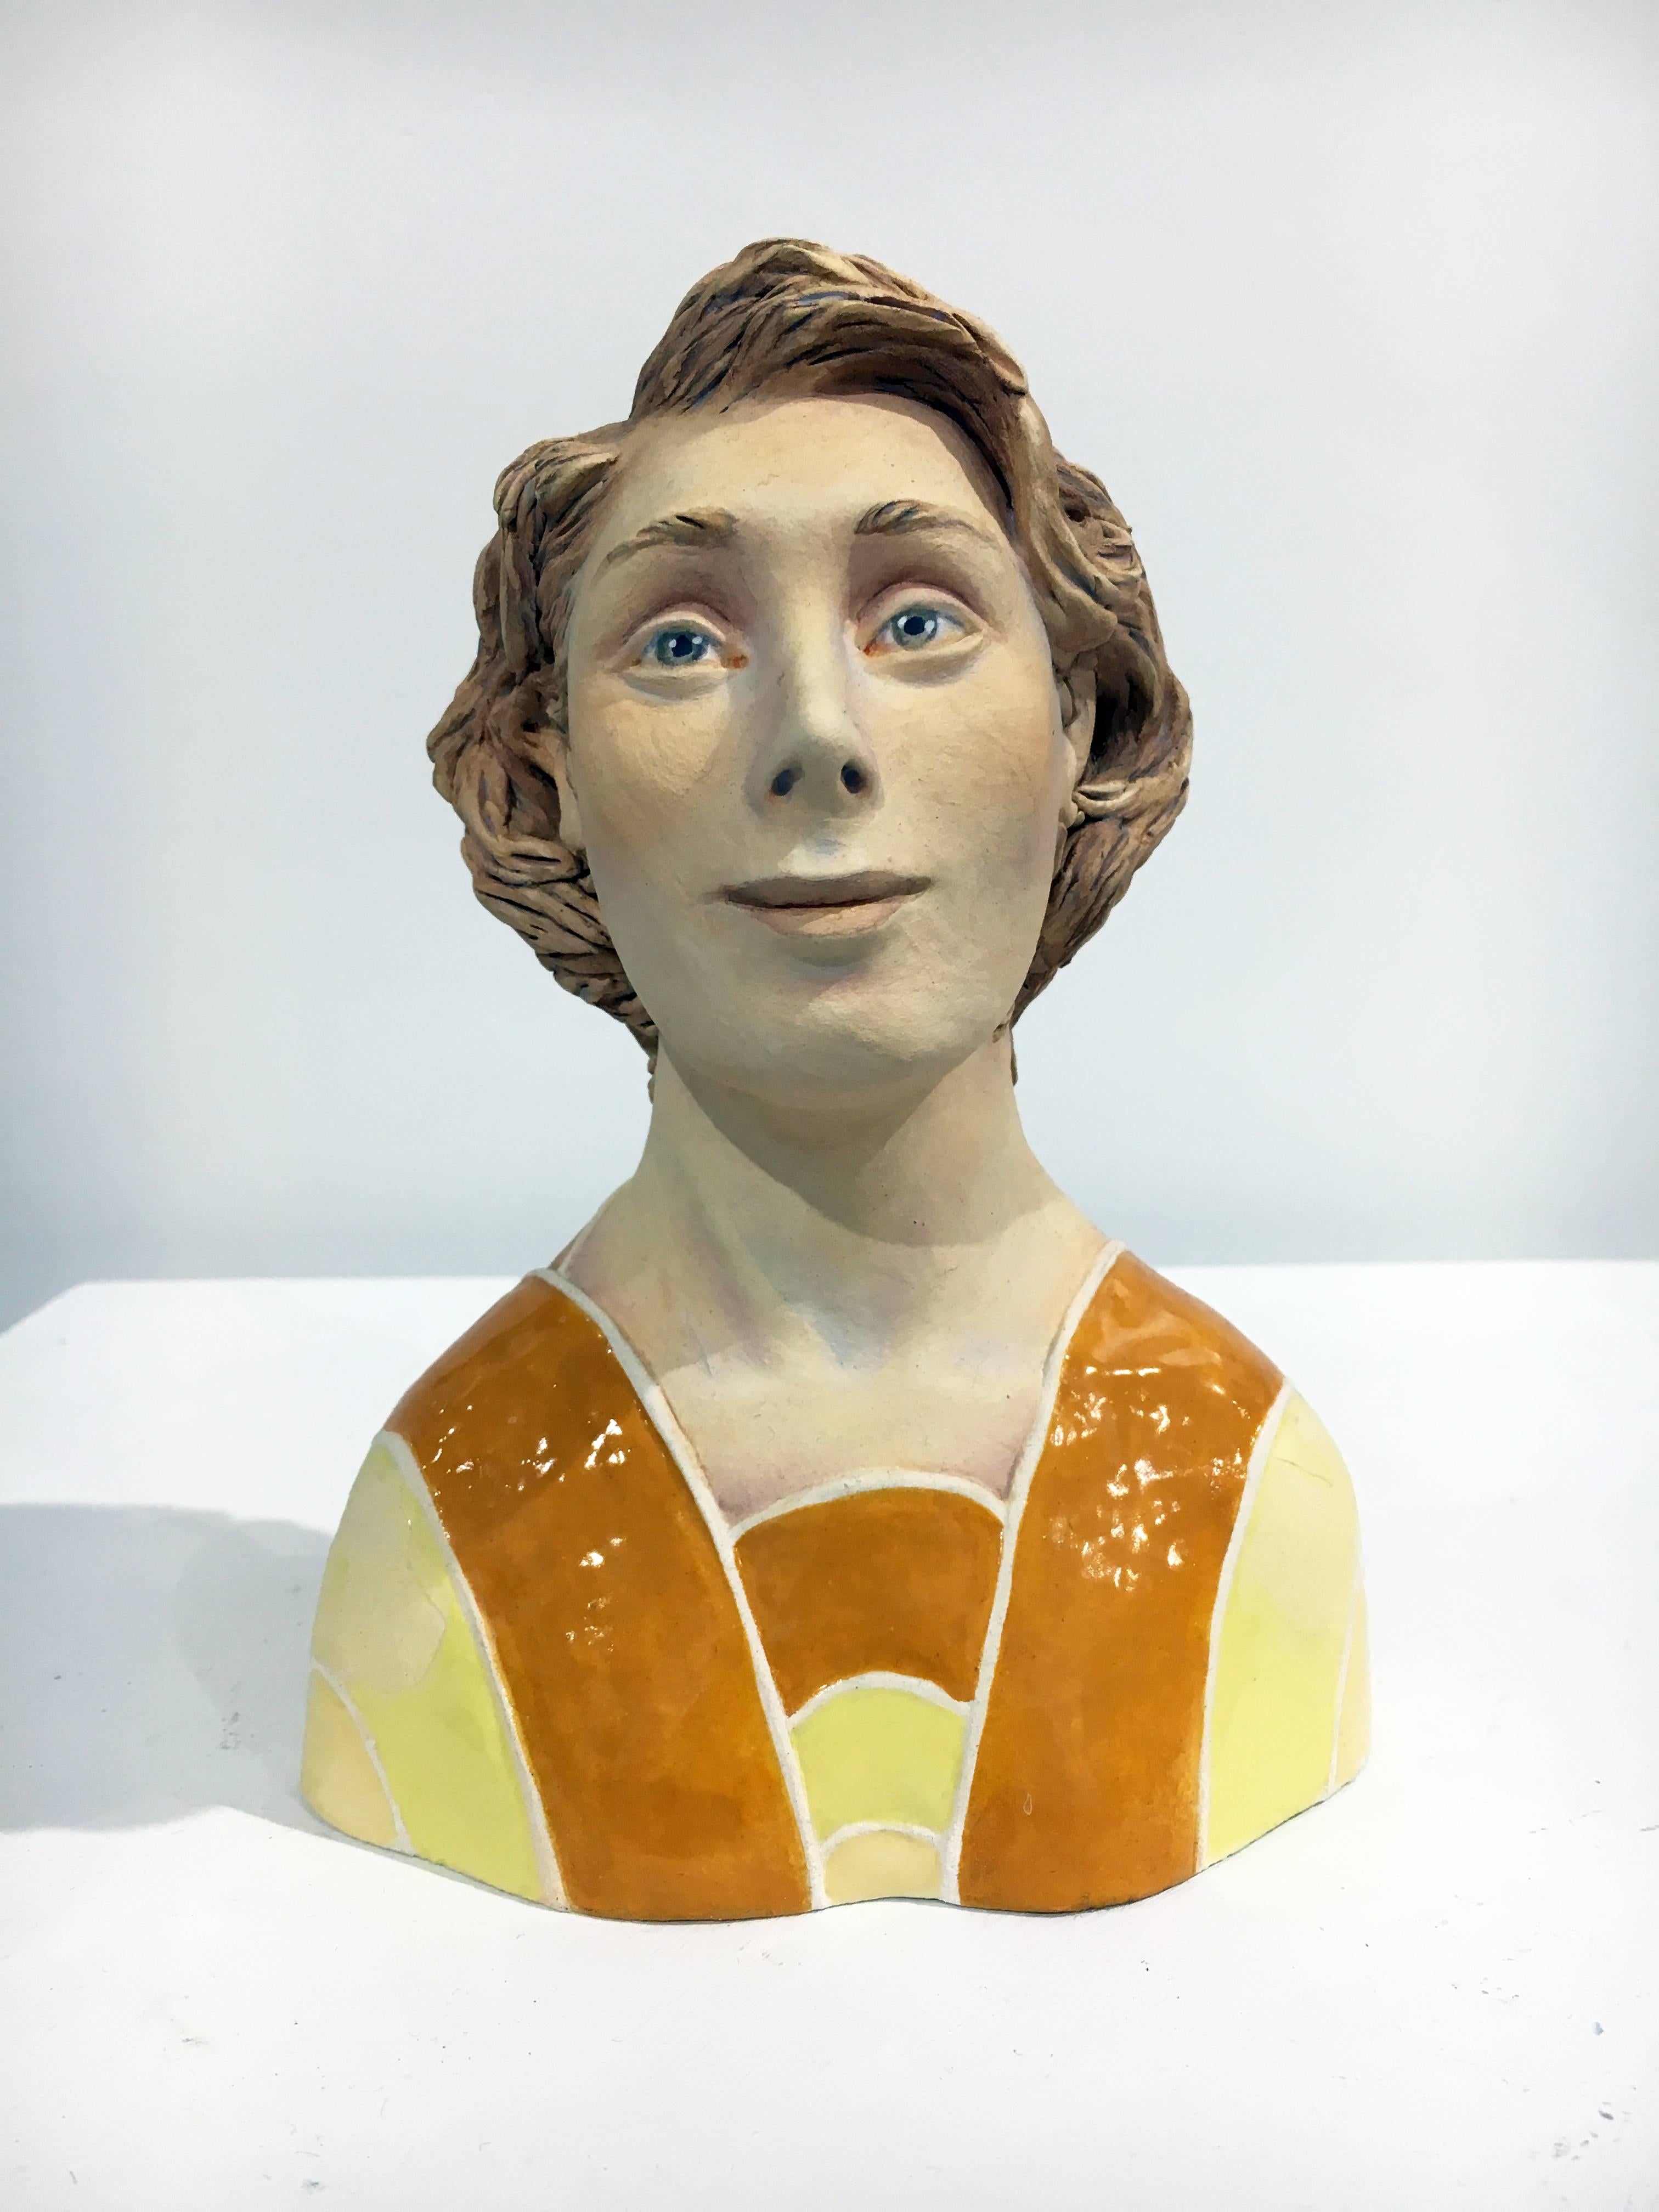 Beverly Mayeri is a studio artist living in the Bay Area with over 30 years experience as an established ceramic sculptor. She earned a BA from the University of California, Berkeley, and an MA in sculpture at San Francisco State University. Mayeri